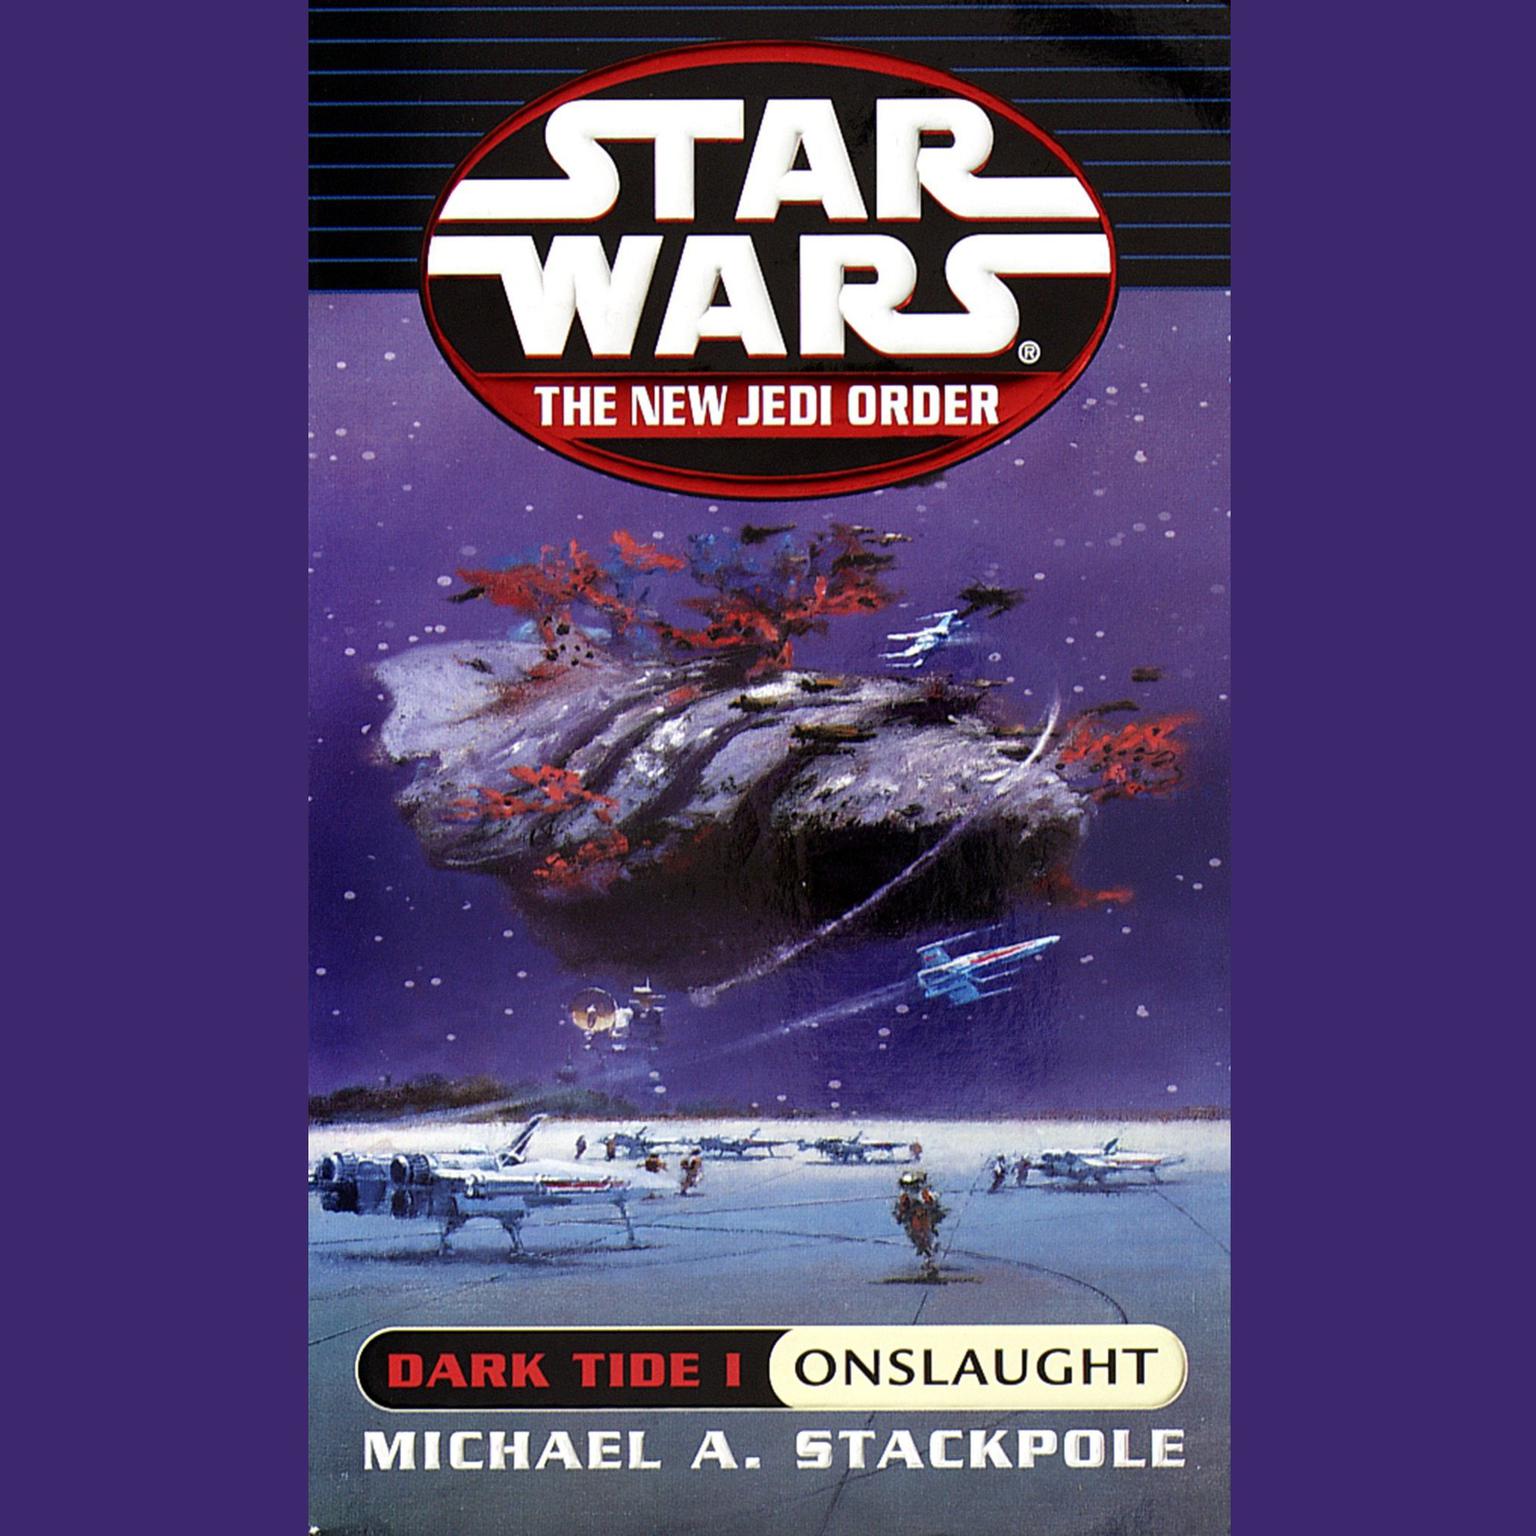 Star Wars: The New Jedi Order: Dark Tide 1: Onslaught (Abridged) Audiobook, by Michael A. Stackpole